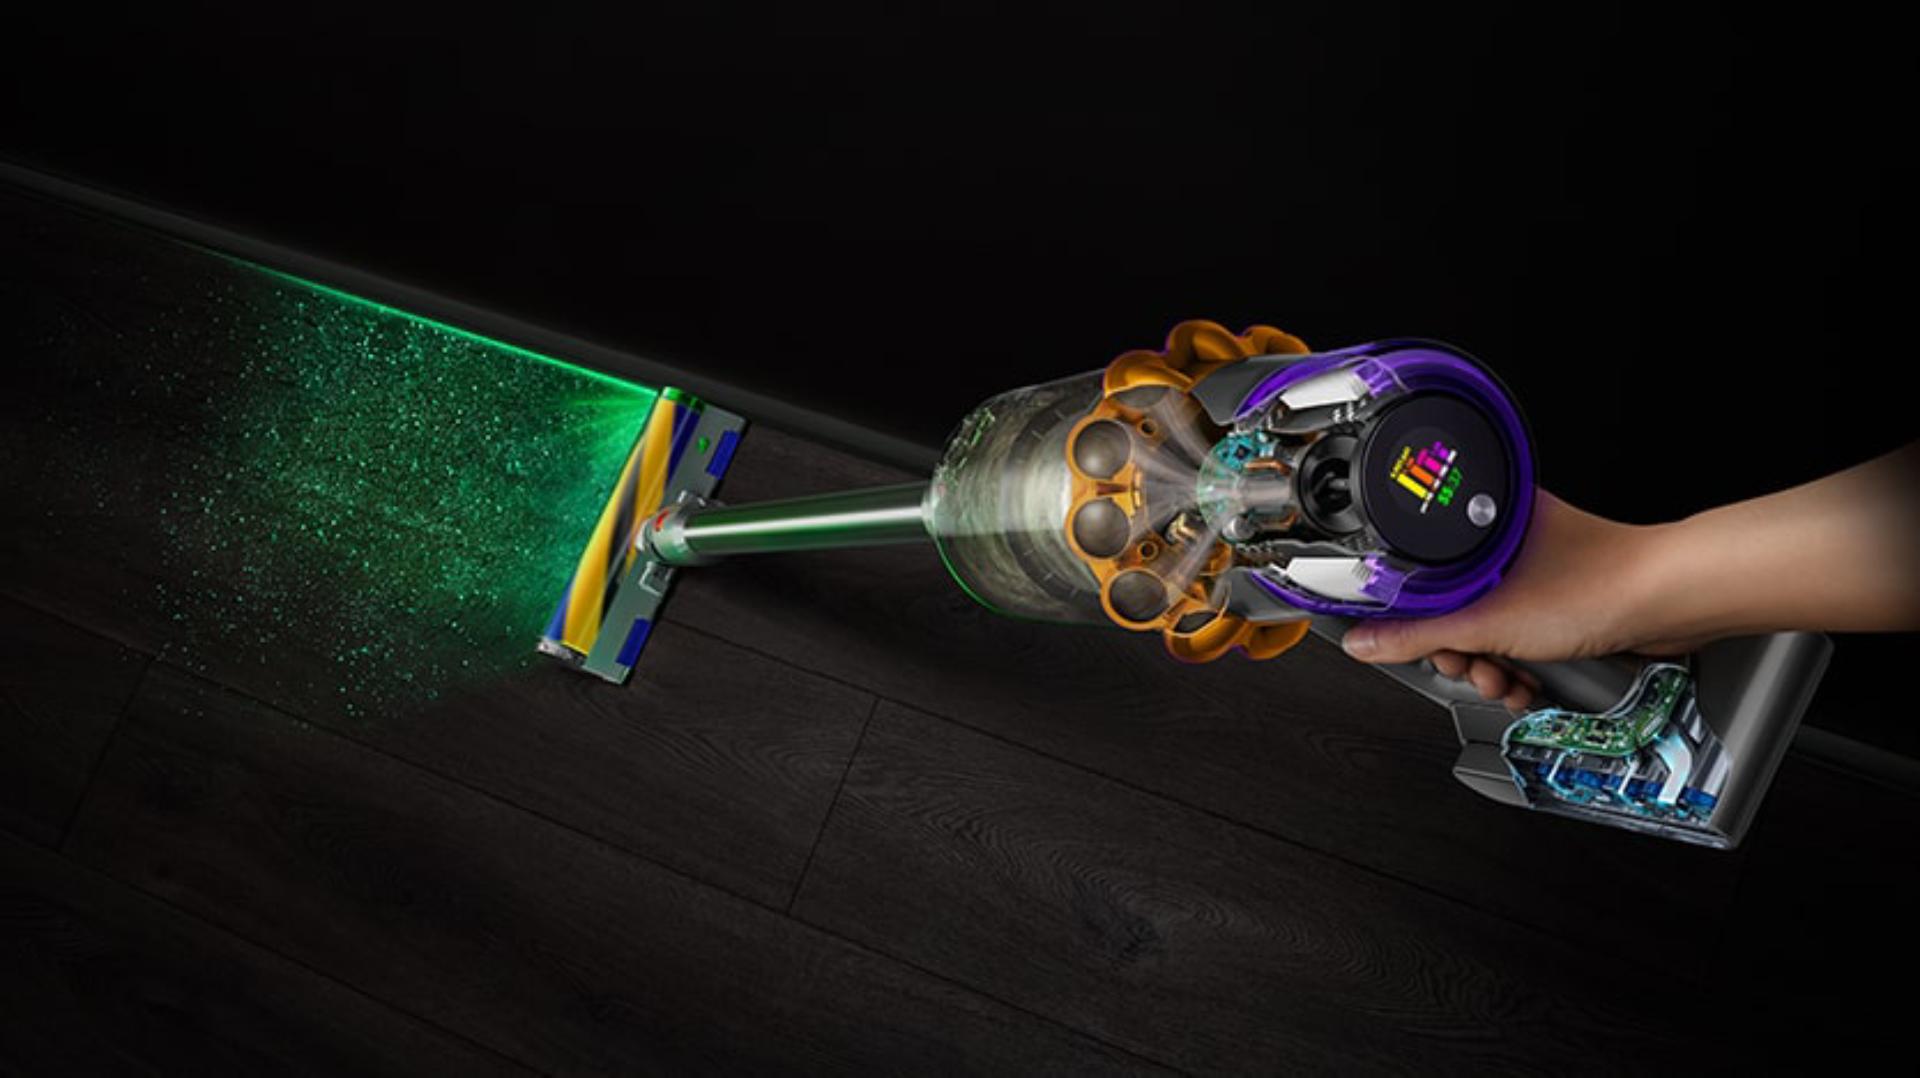 Aerial view of Dyson V15 vacuum showing the LCD screen